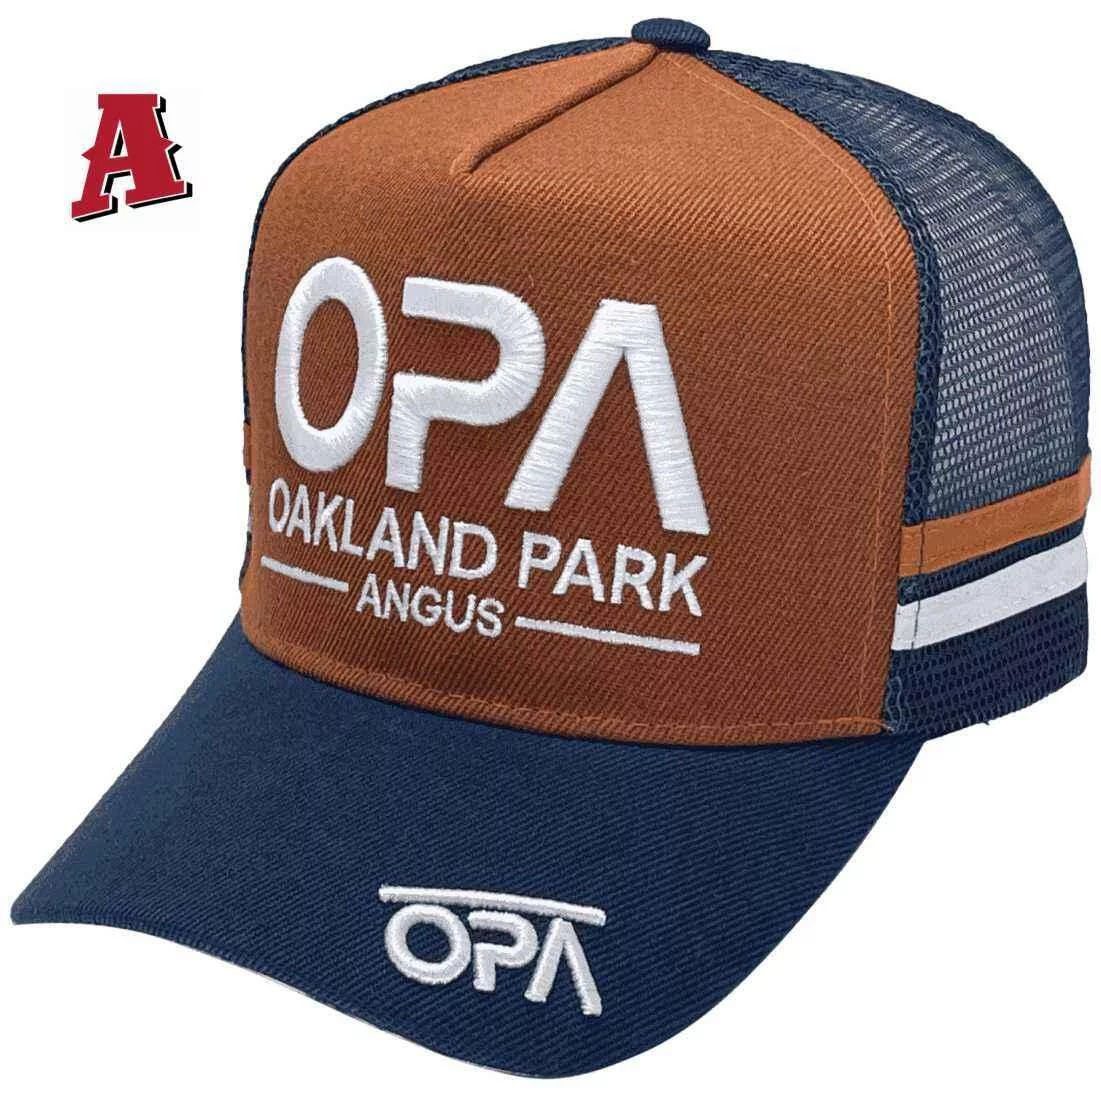 Oakland Park Angus Kempsey NSW Original Midrange Aussie Trucker Hats with Double Sidebands and Australian Head Fit Crown Rust Navy White